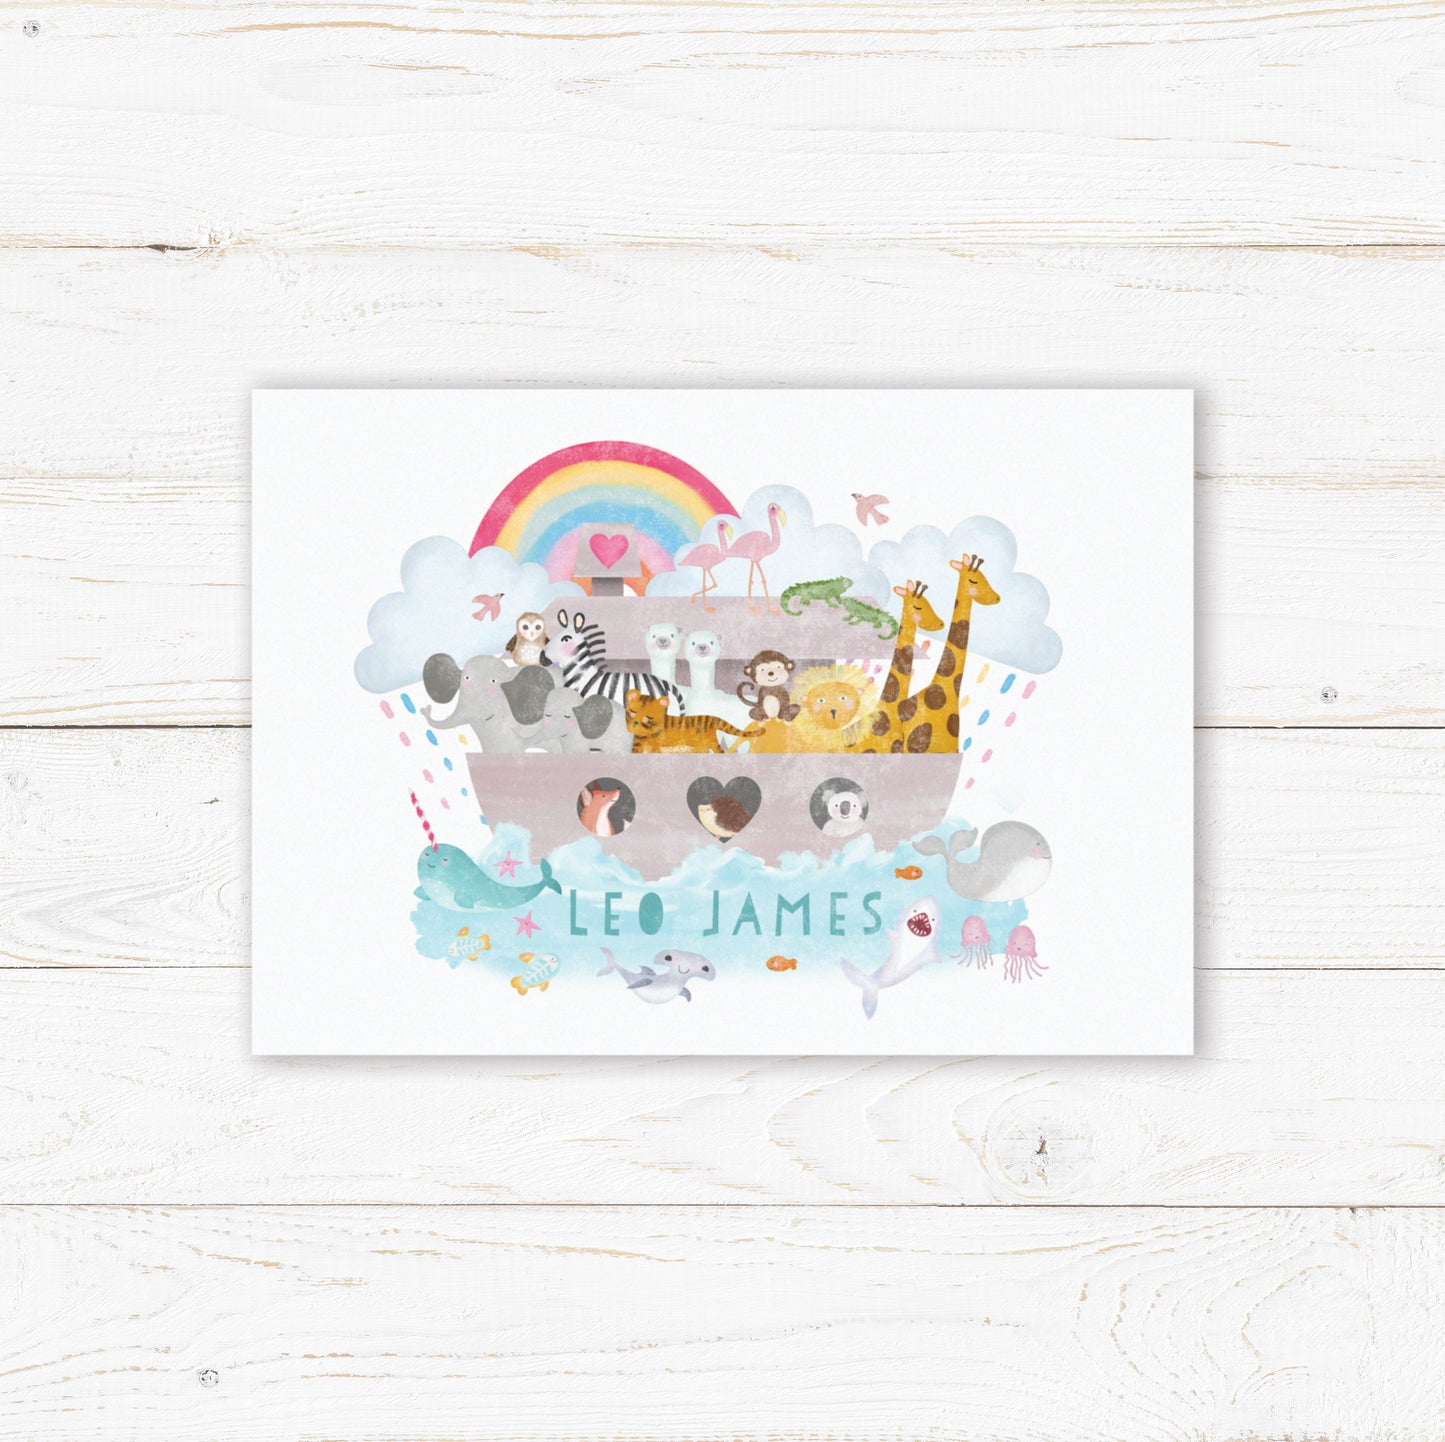 Noah's Ark Print. Nursery Childs Bedroom. New Baby Gift. Personalised Name Print. Child's Birthday Present. Naming Day Wall Art